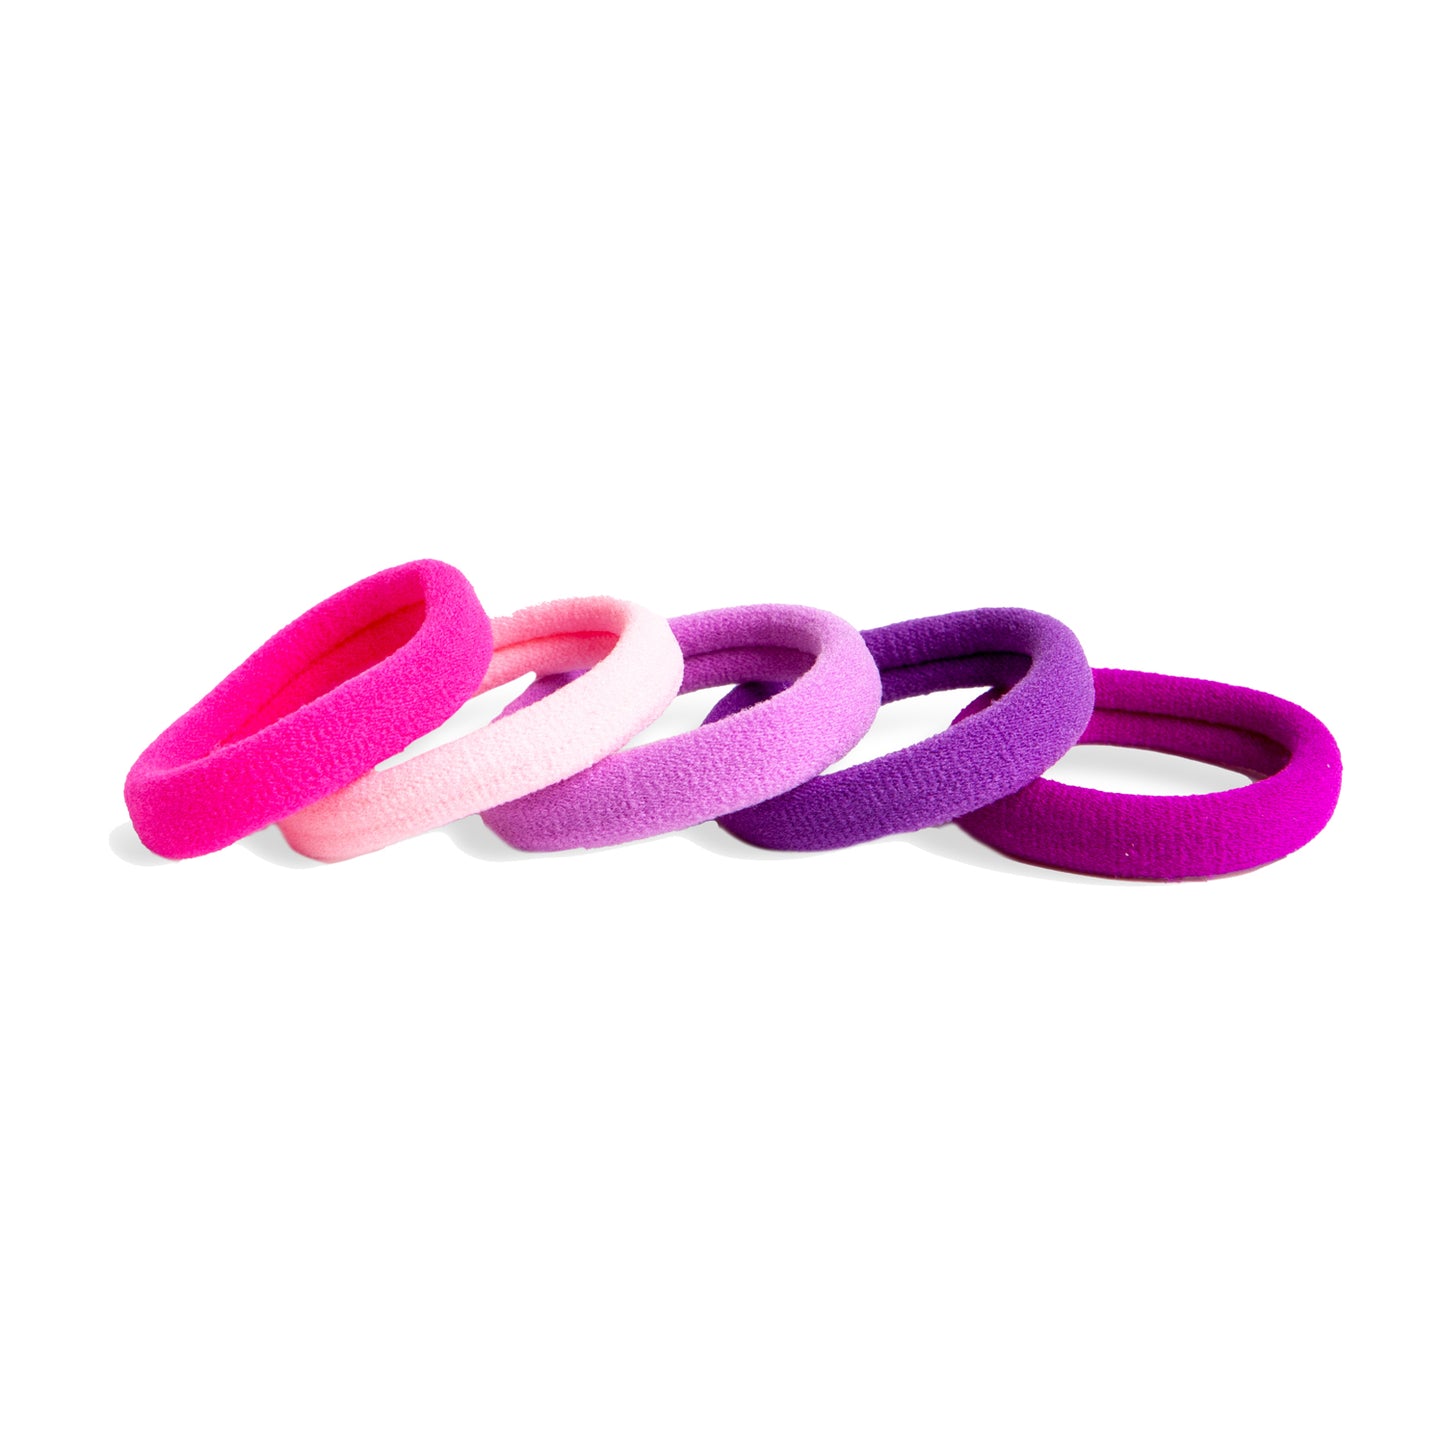 Martinelia - Hair Elastic (Colors Vary - One Supplied)